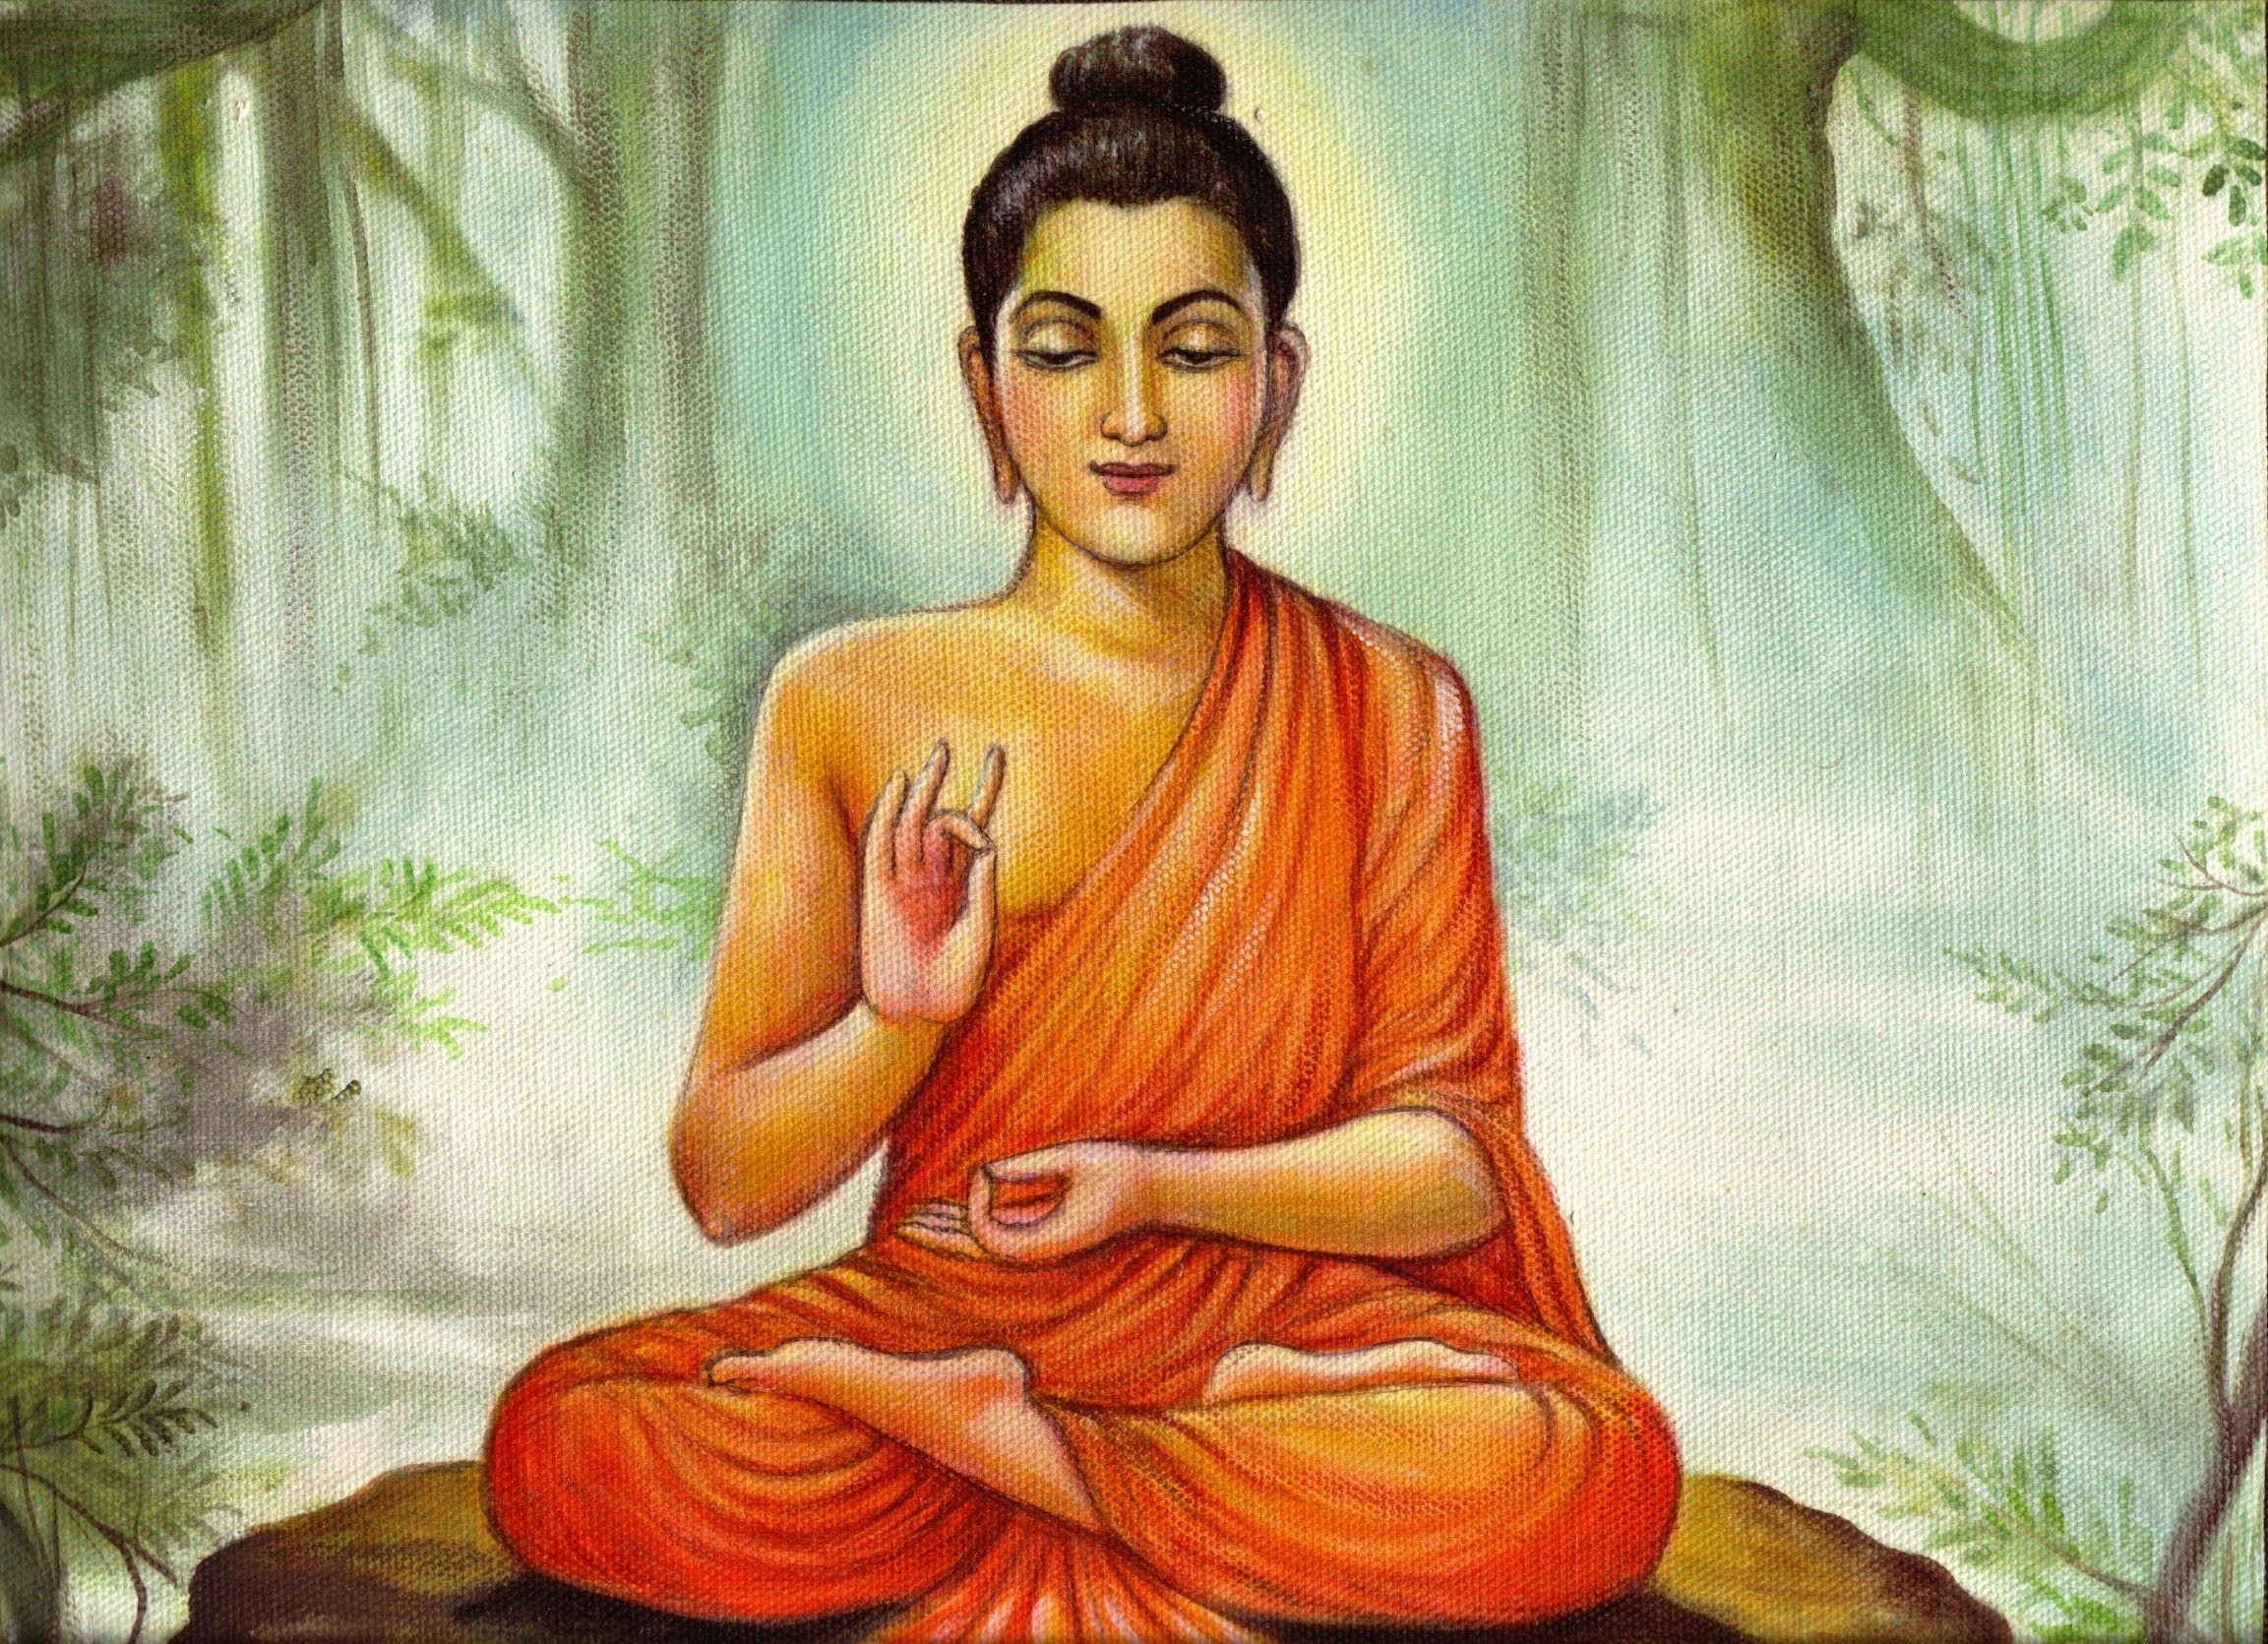 Gautam Buddha Hd Wallpapers Images Pictures Photos - 1080p Gautam Buddha Hd , HD Wallpaper & Backgrounds